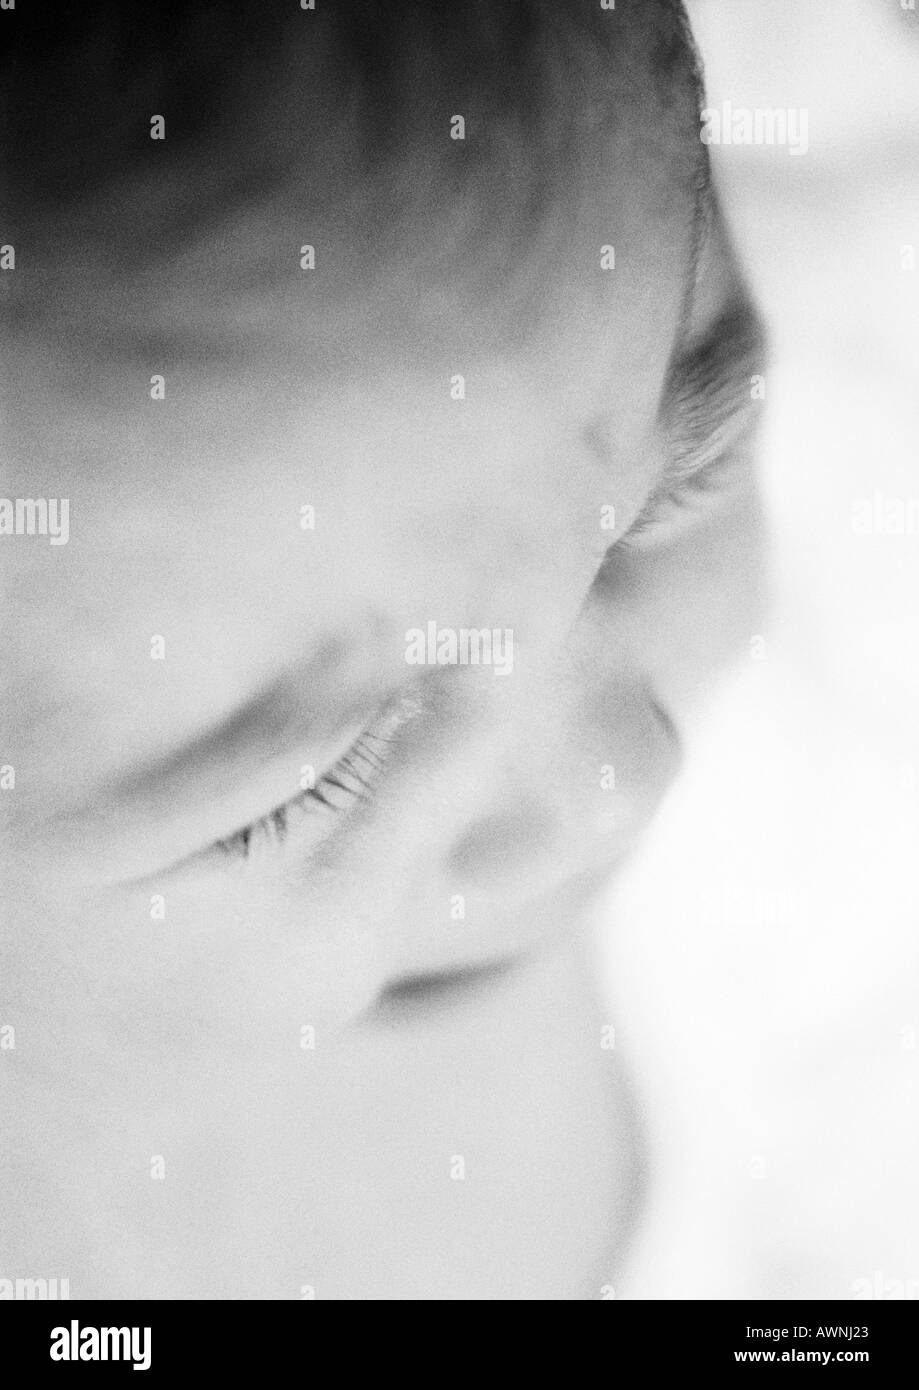 Baby crying, close-up, high angle view, B&W. Stock Photo